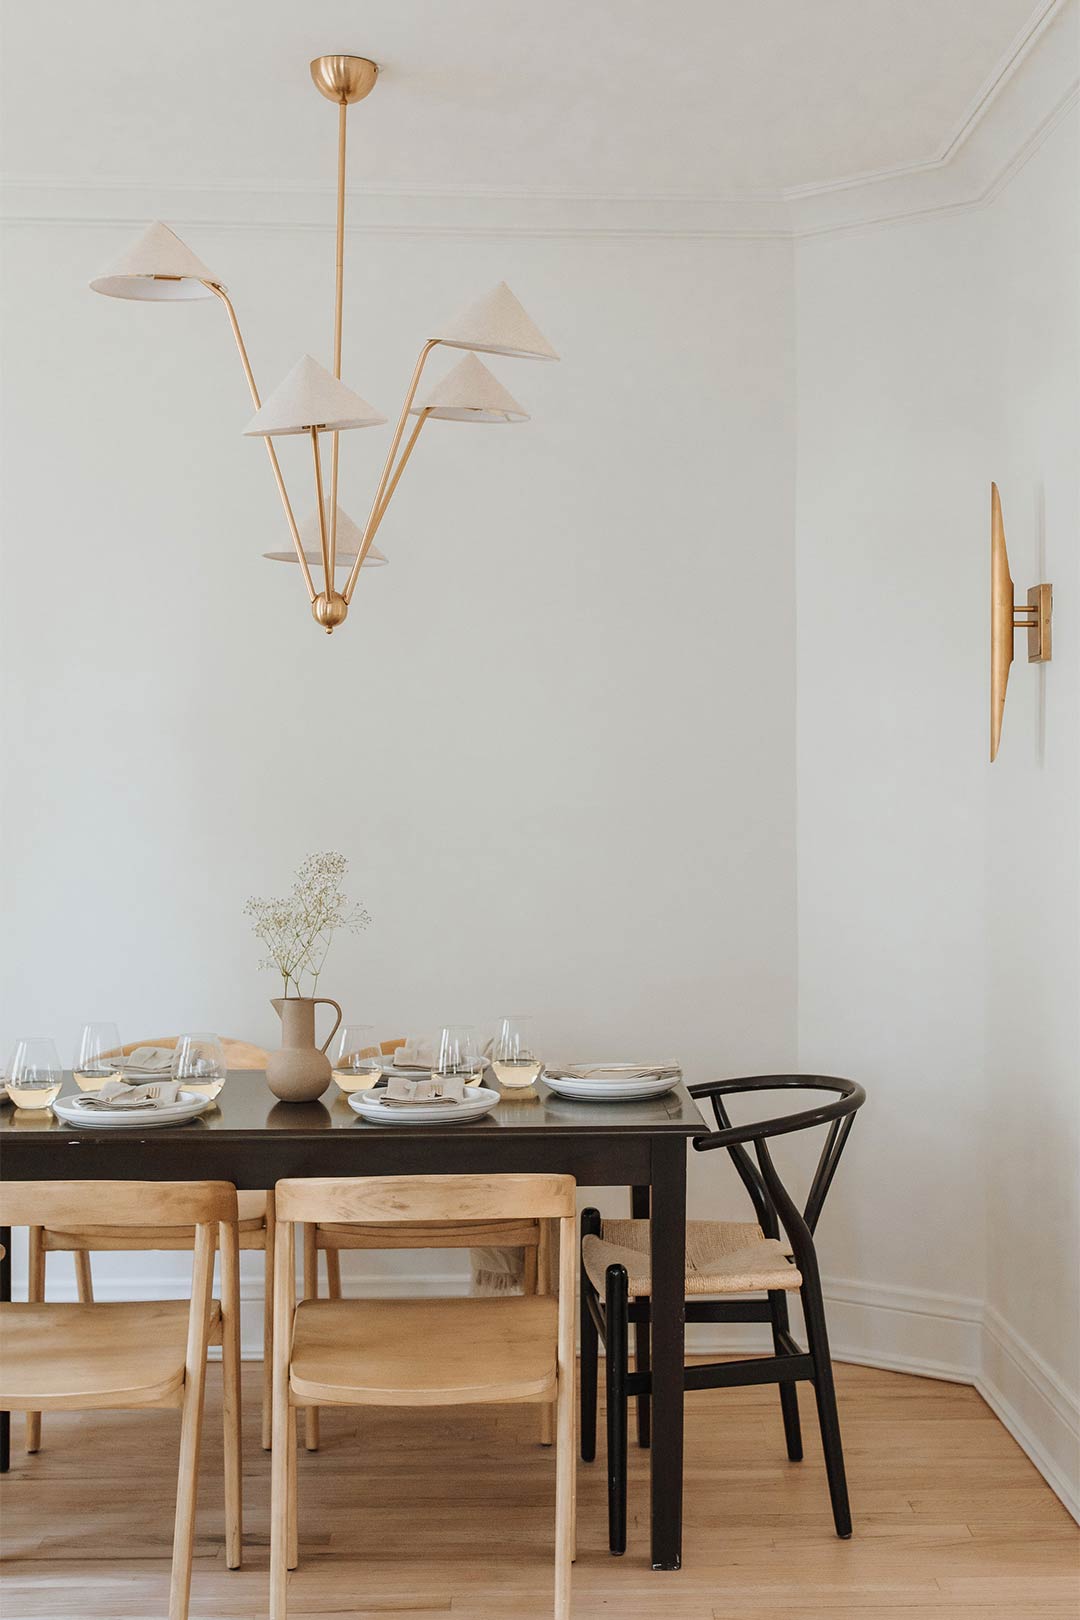 Amber Lewis for Anthropologie Mantis Chandelier paired with brass sconce and white oak flooring